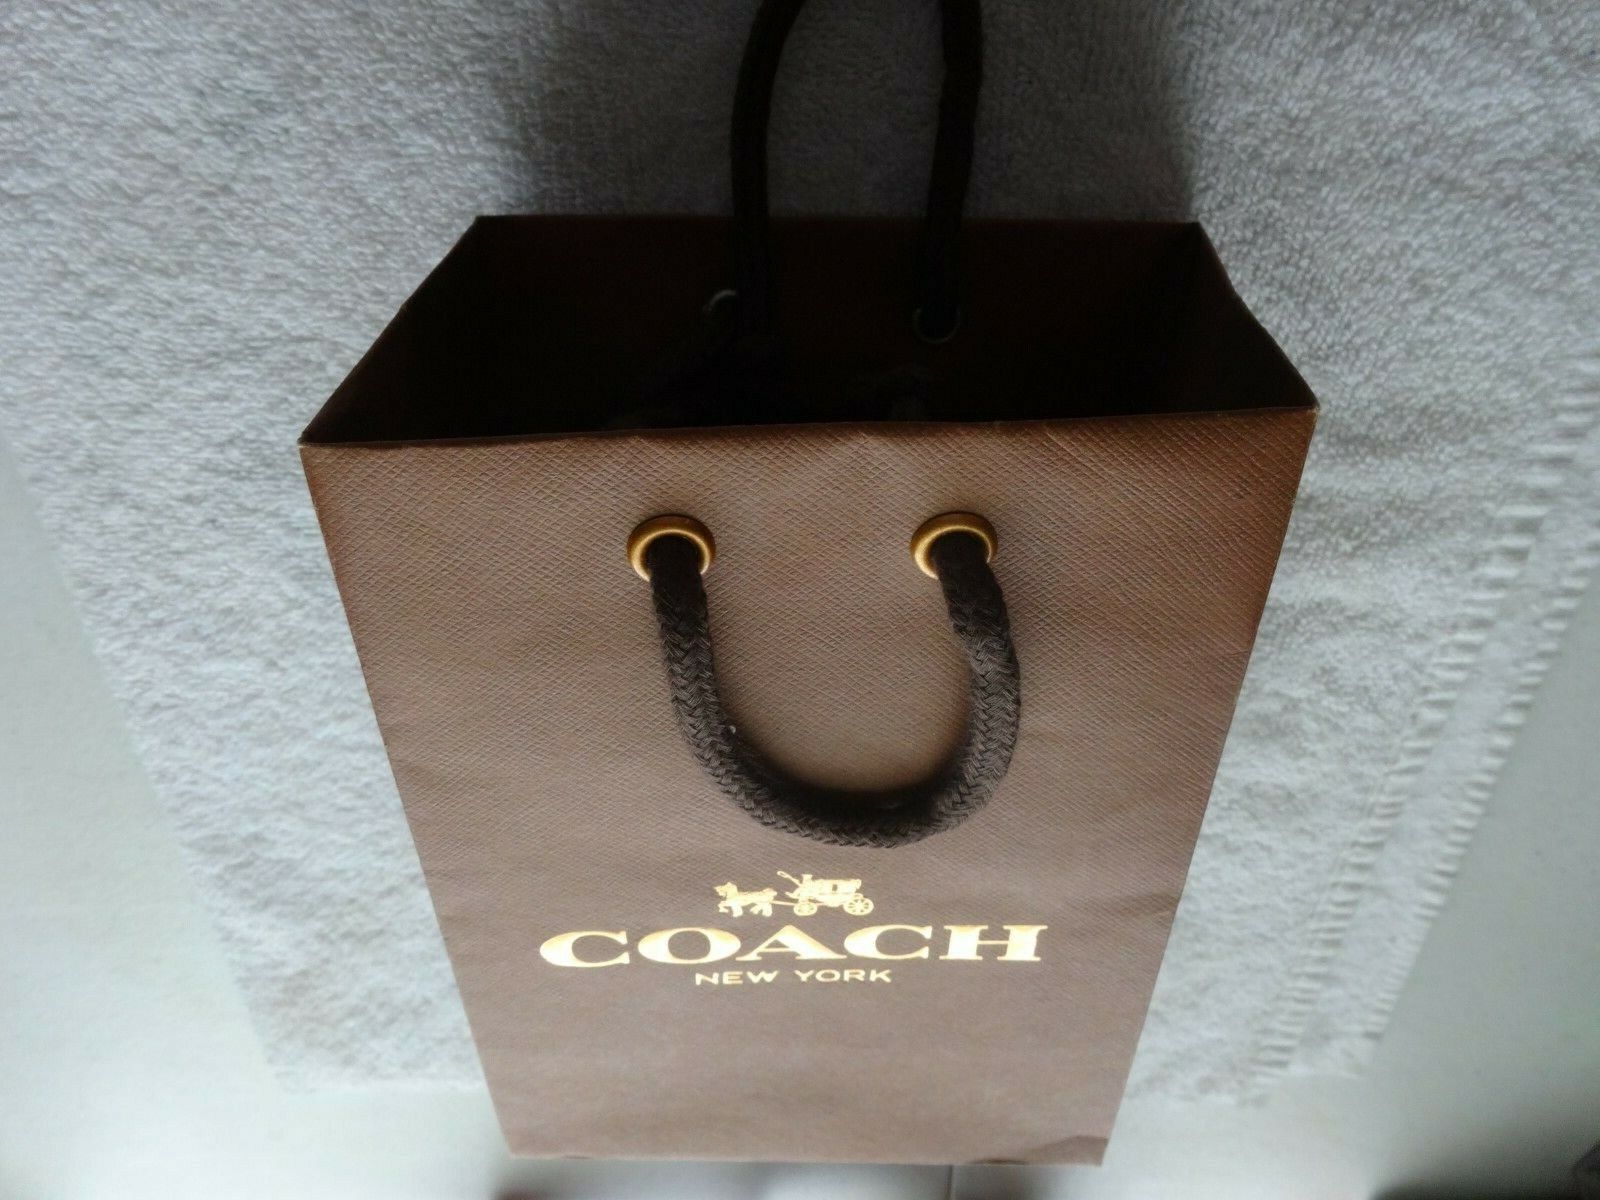 COACH GIFT BOX-BROWN SMALL Cheap super special price Low price NEW 6 4 dee 2